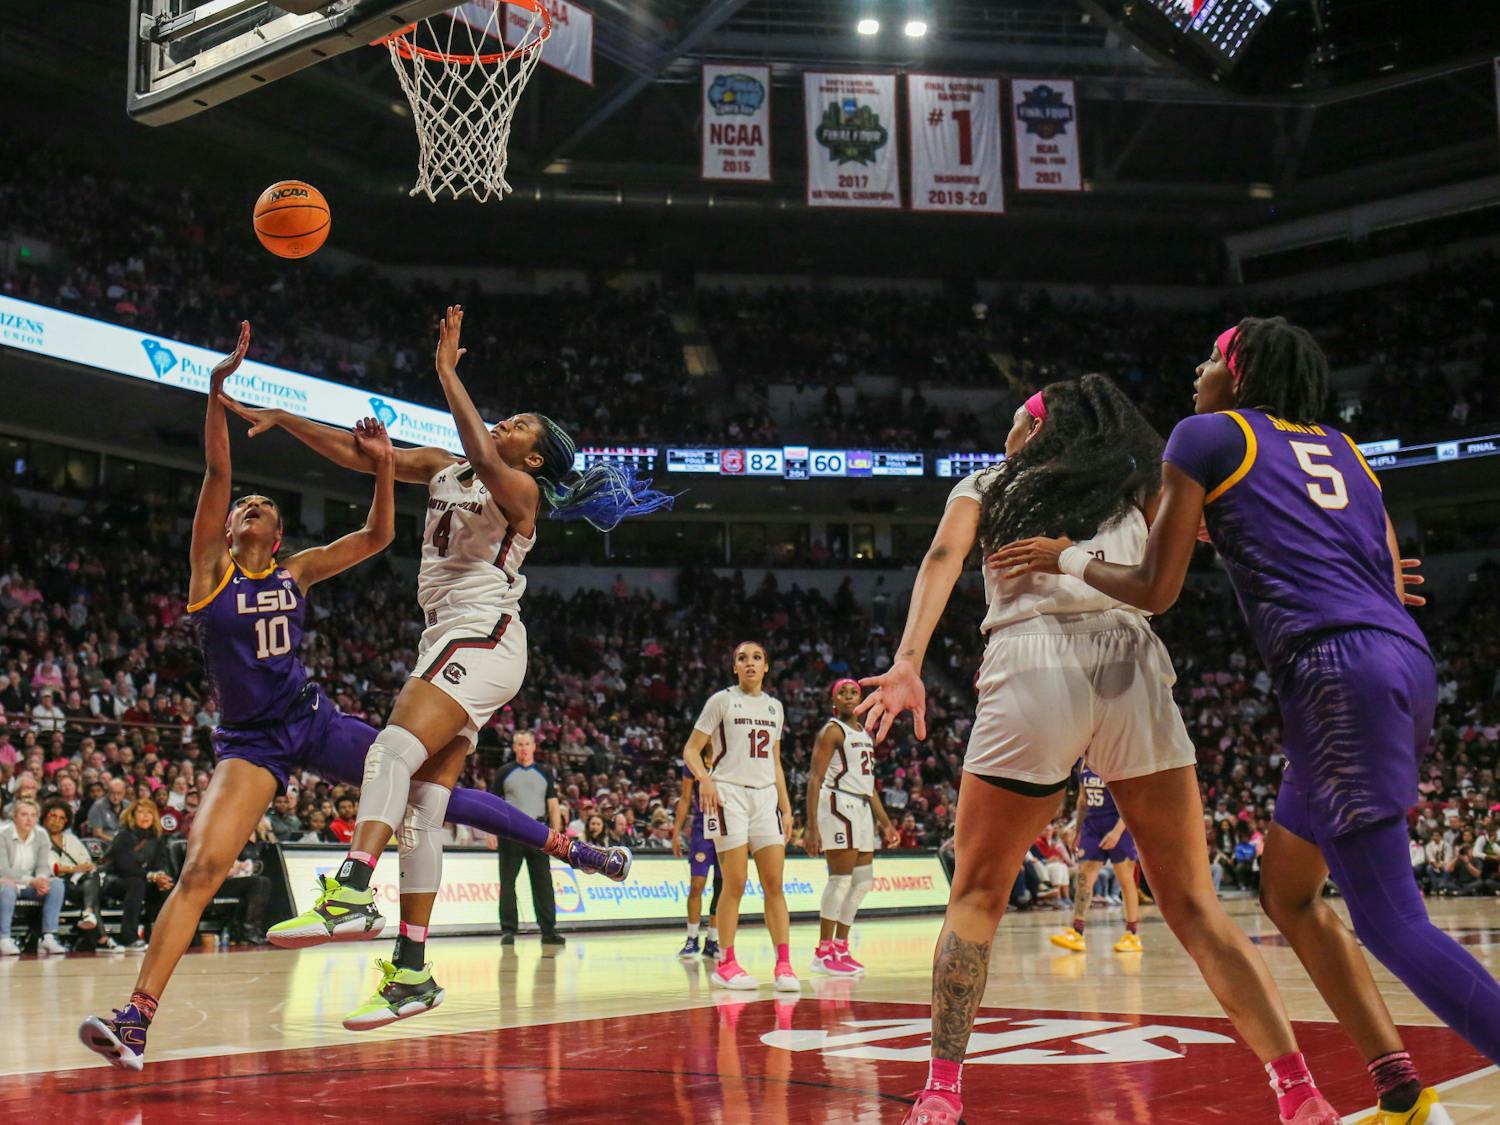 Senior forward Aliyah Boston goes for a block during South Carolina’s game against LSU at Colonial Life Arena on Feb. 12, 2023. The Gamecocks beat the Tigers 88-64.